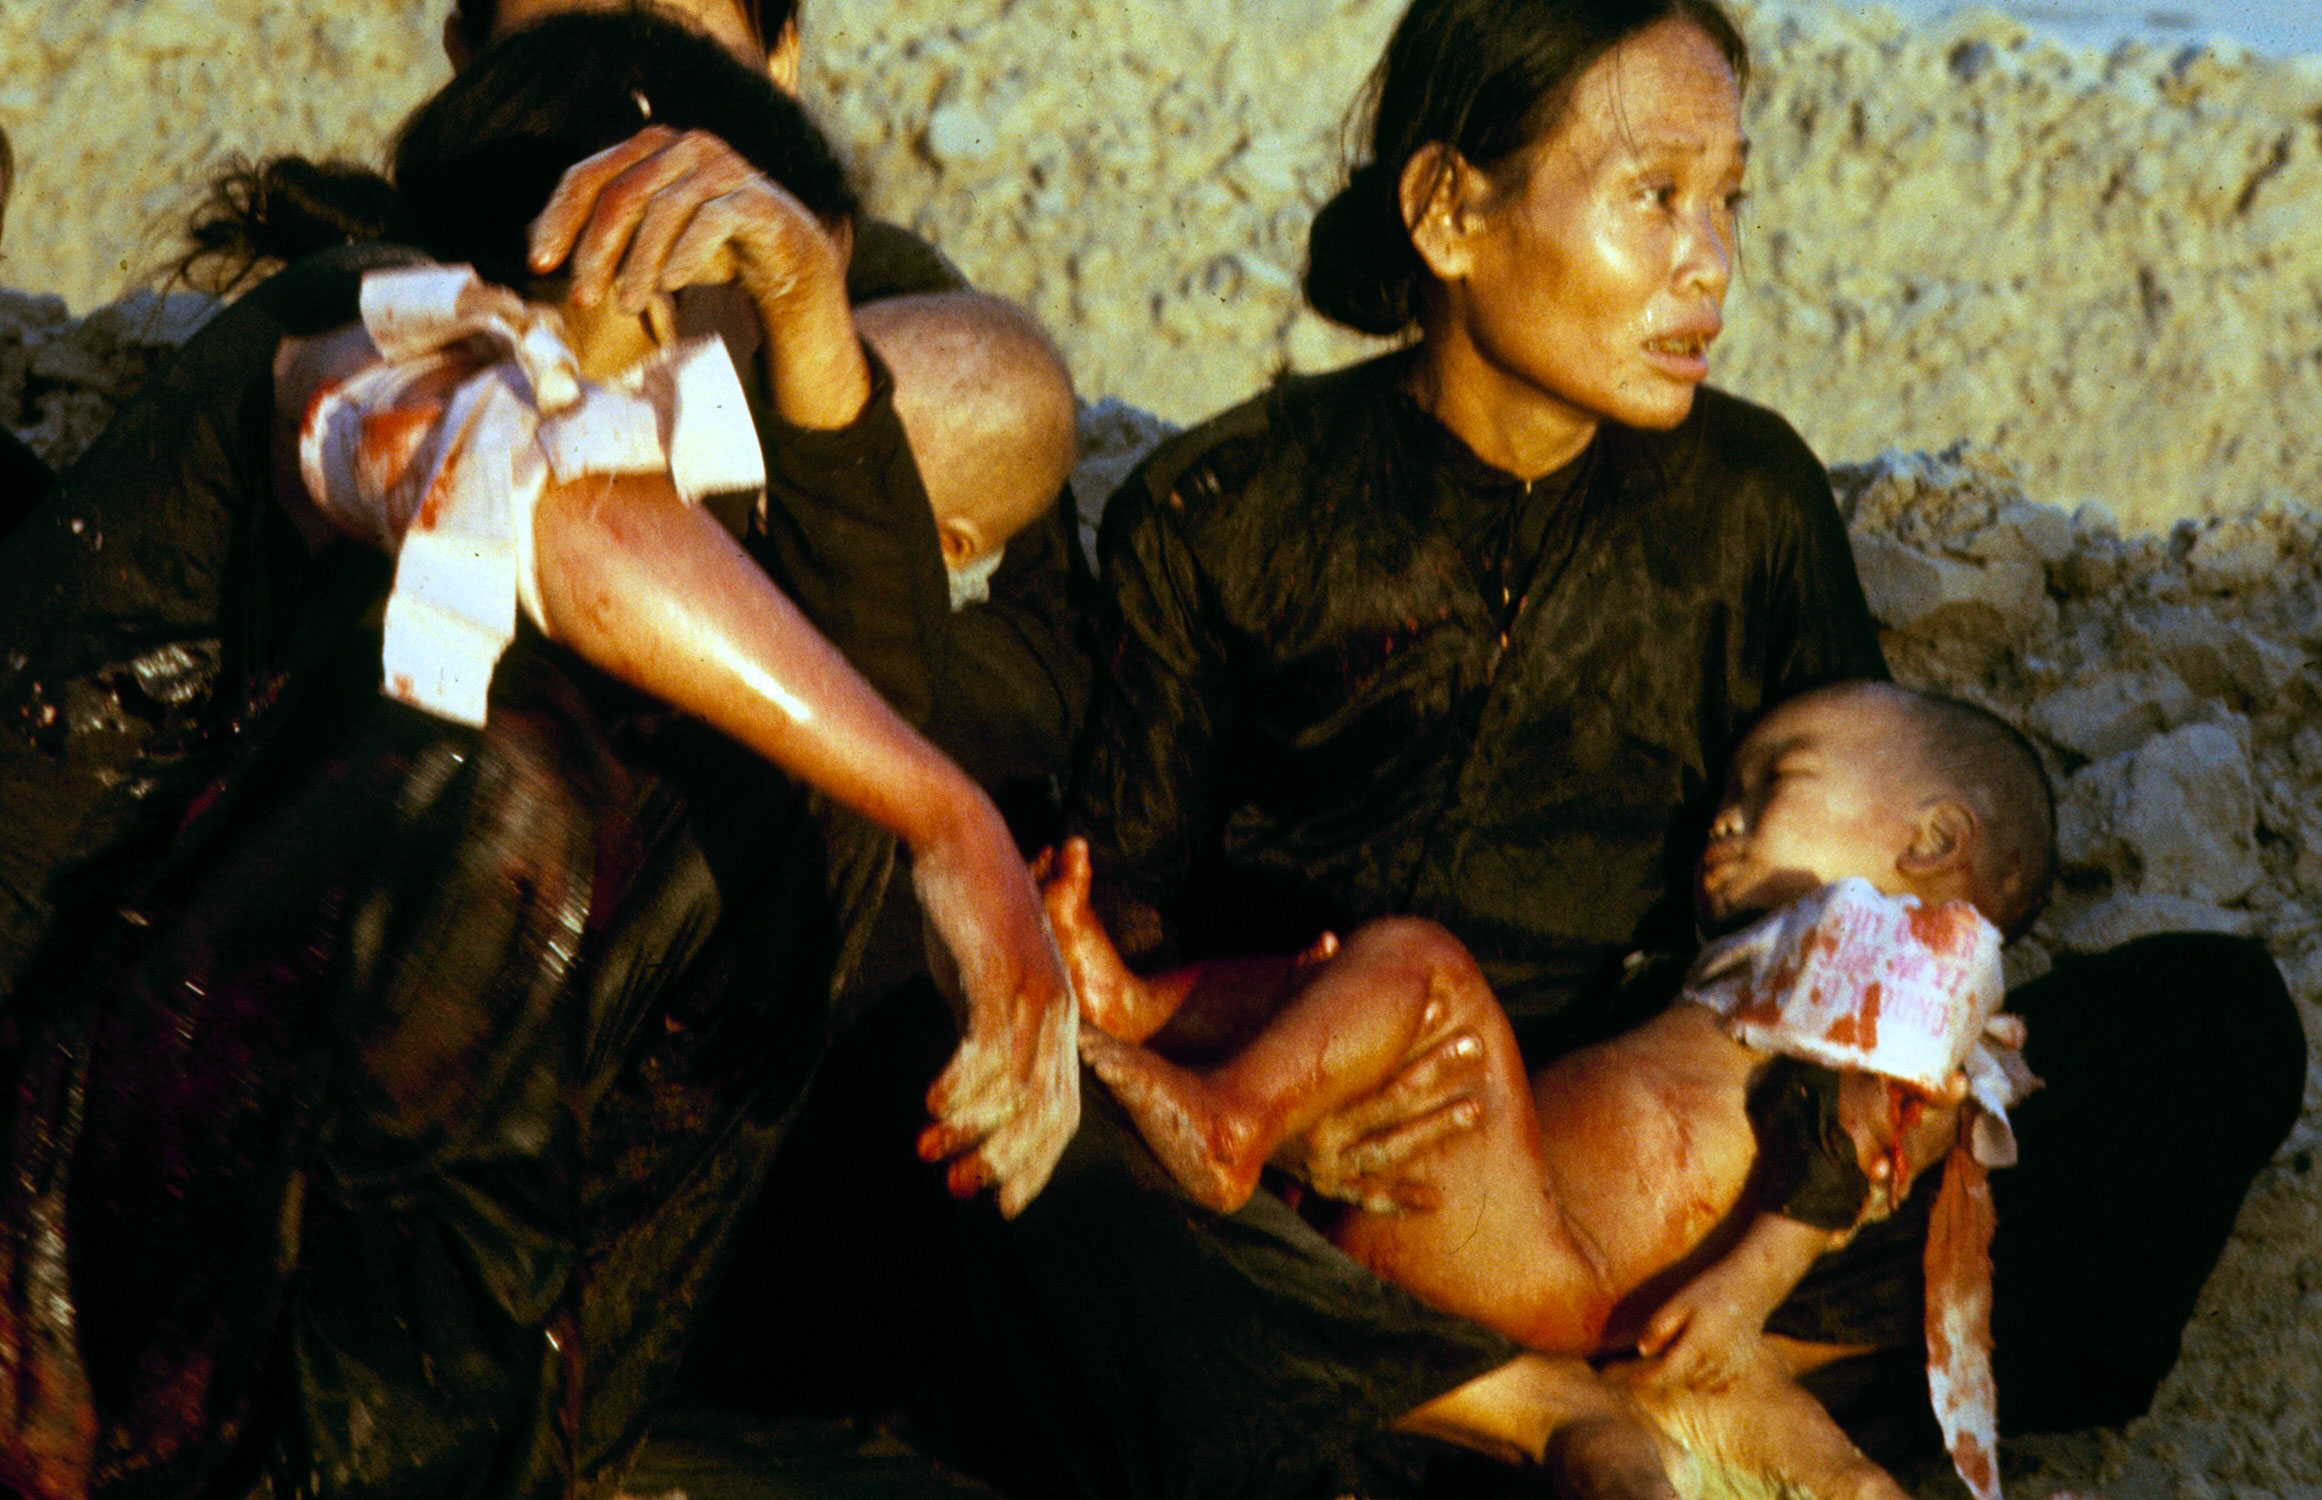 The mother of the wounded baby, numbed by shock, was guided like a blind person out of the battle zone. Now she sits amongst wounded villagers, clinging to her dying child. After bandaging the little boy as best he could, the medic returned him to the mother so he could rejoin his outfit. Soon afterward, the baby was airlifted to a hospital ship off-shore, where Navy doctors worked frantically but unsuccessfully to save him.